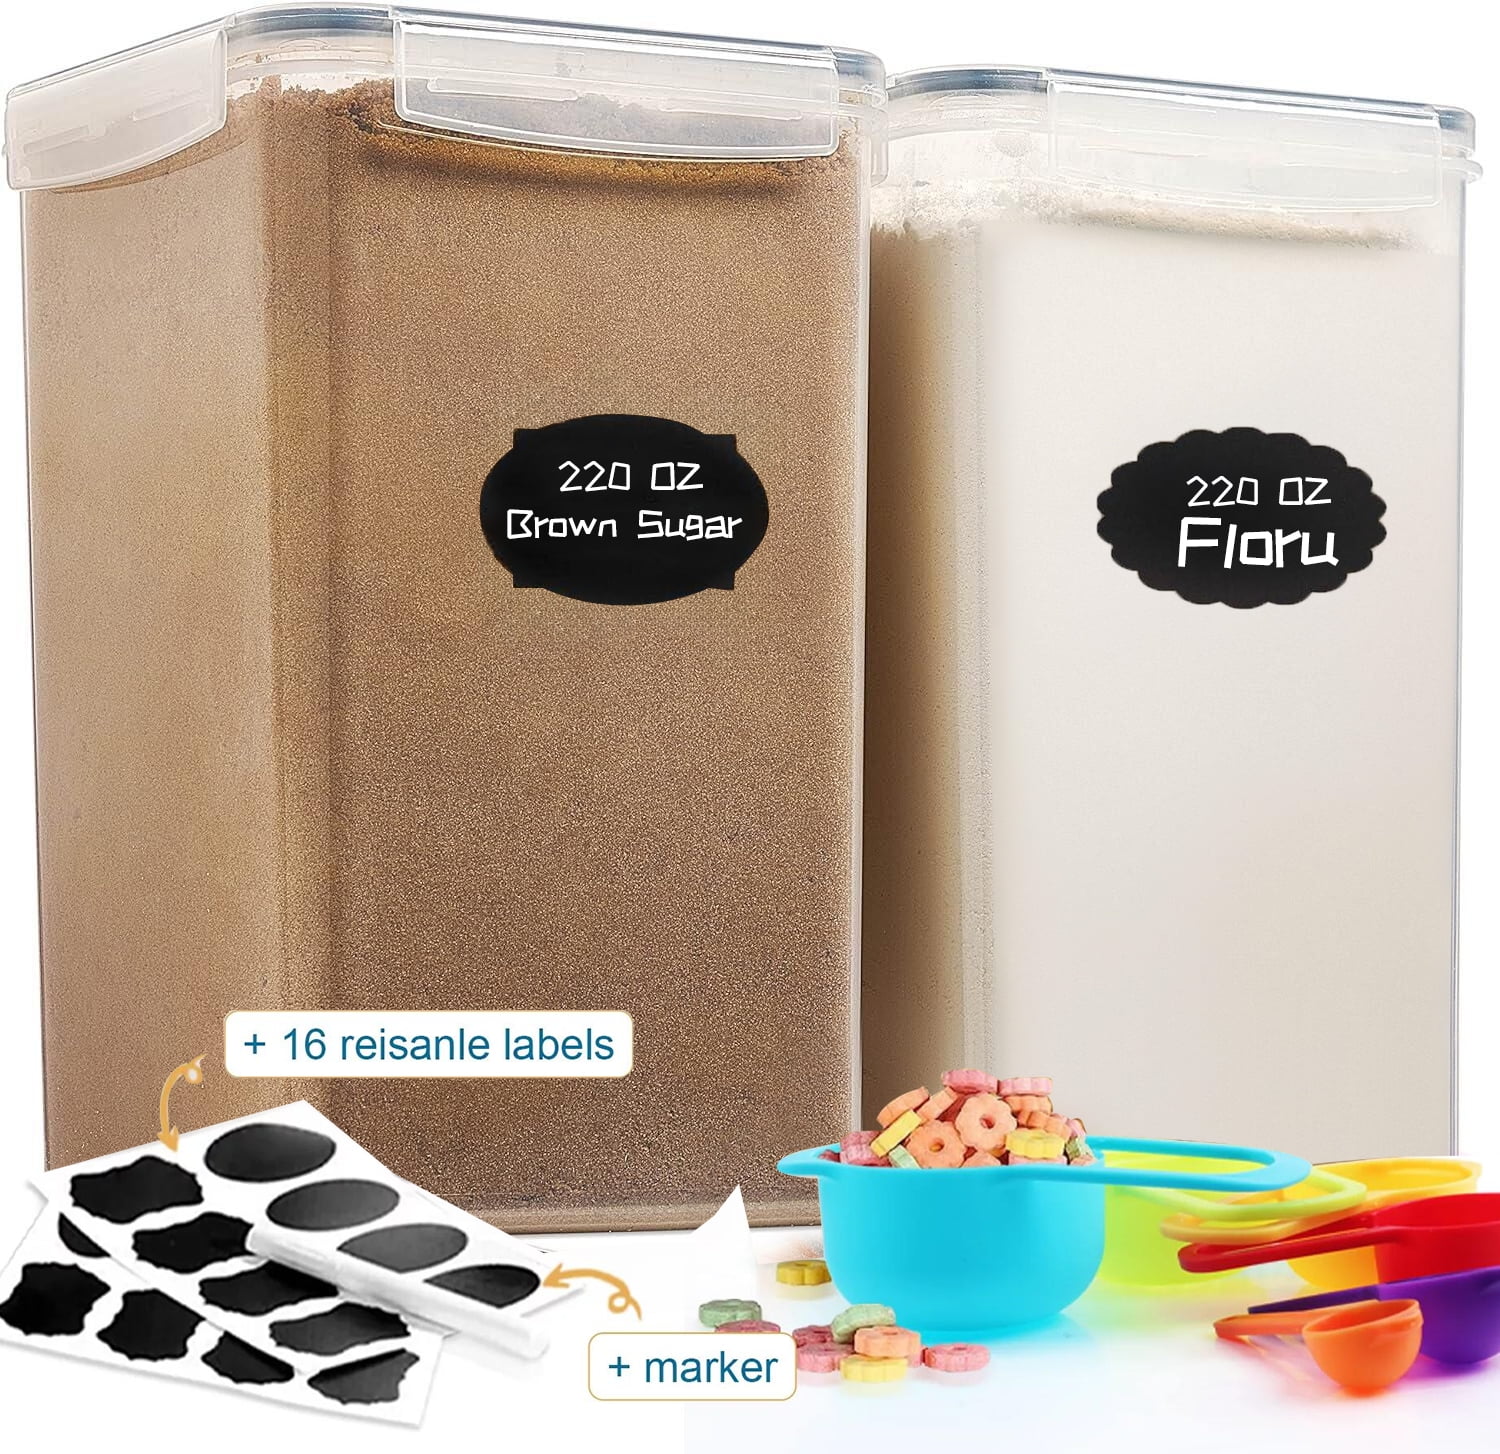 Buy Extra Large Tall 4 Pieces Airtight Food Storage Containers Kitchen  Pantry Storage Containers Flour, Sugar, Baking Supplies Etc Online in India  